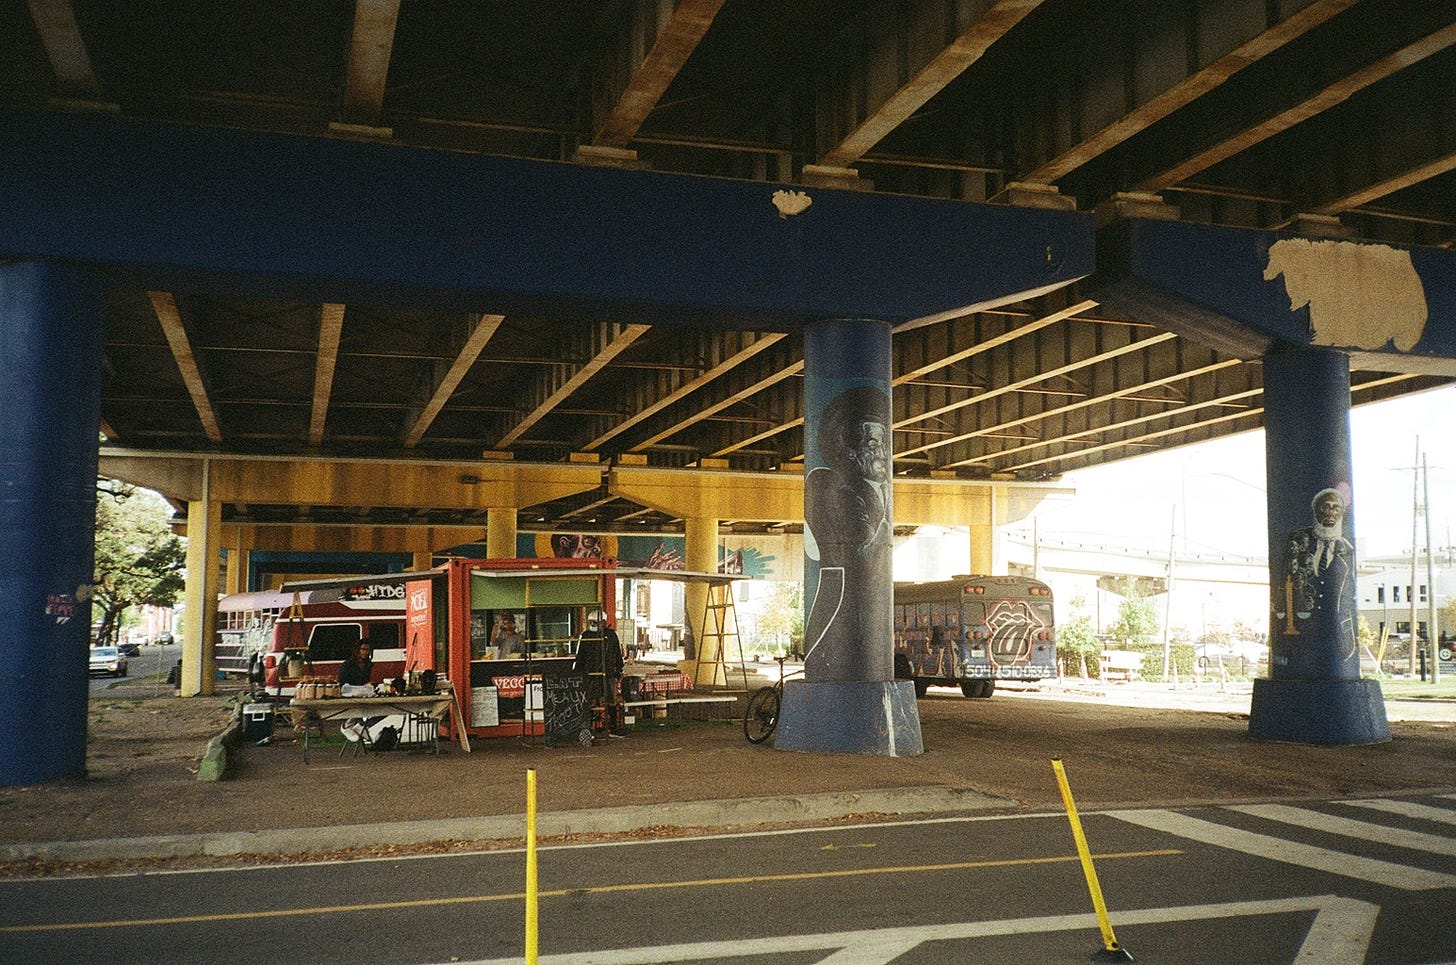 Froot Orleans, a fruit parlor, stationed between two columns of the Claiborne Expressway along the Lafitte Greenway